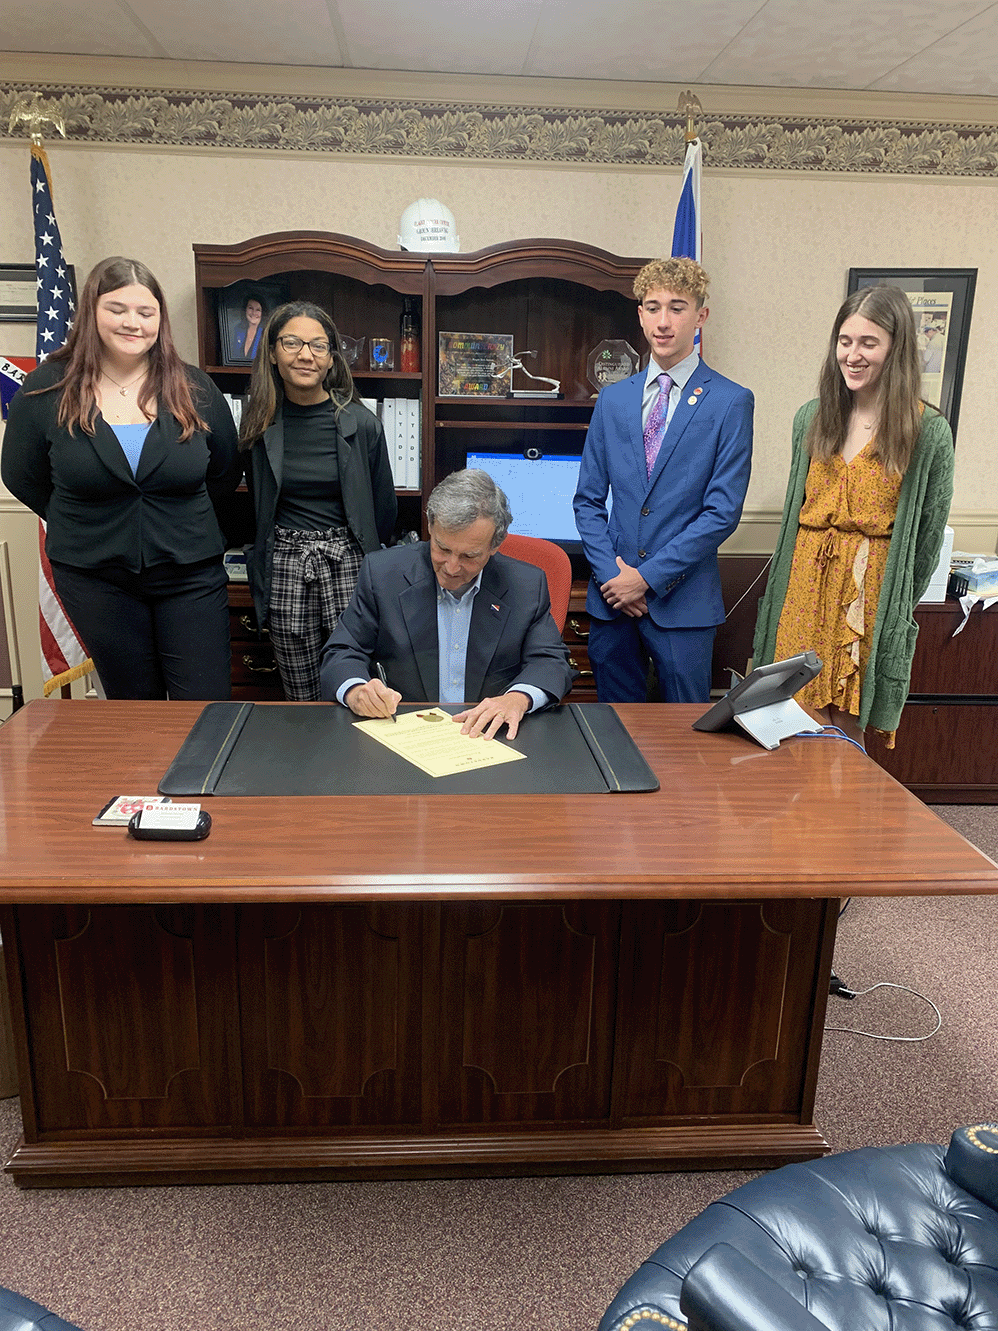 Bardstown High School students stand behind the mayor as he signs a proclamation